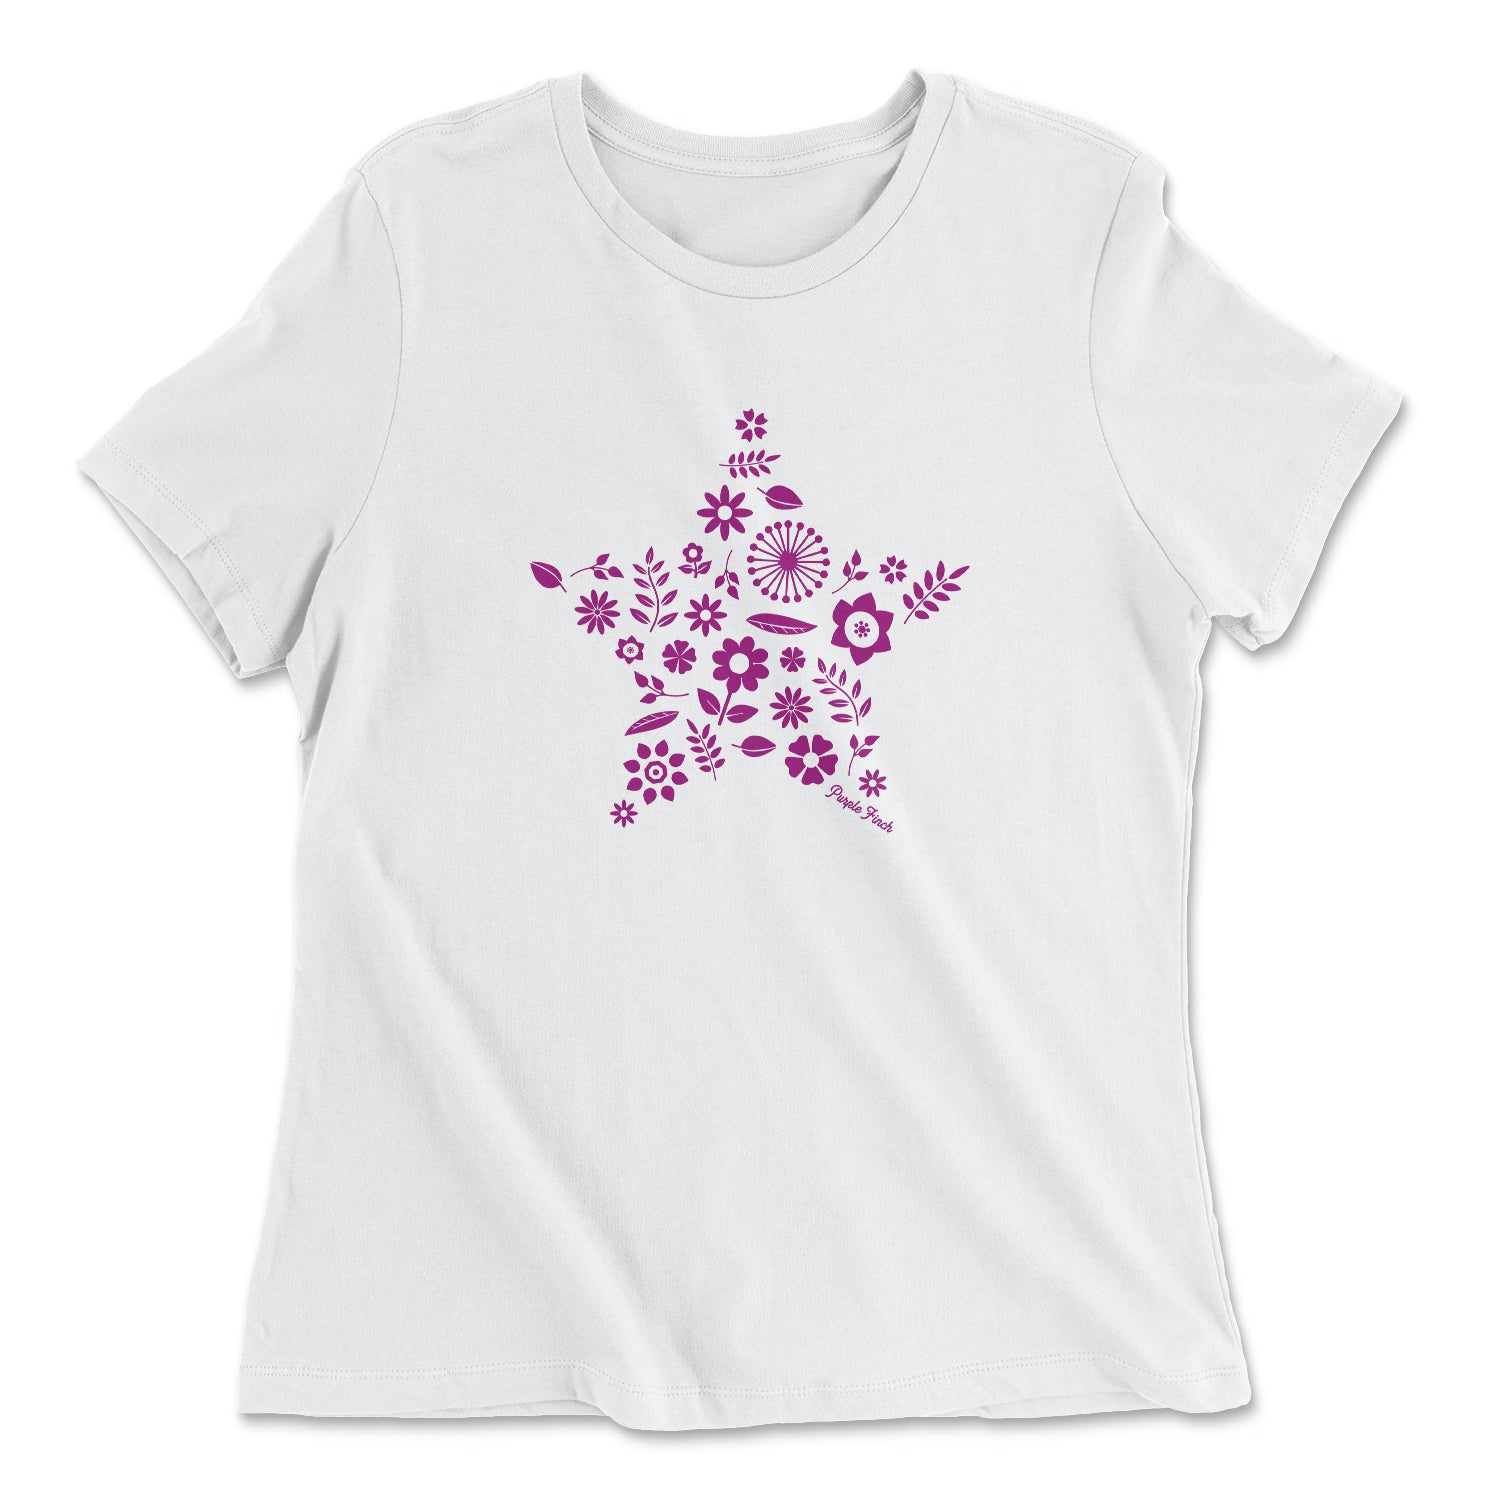 This white t-shirt has a magenta graphic print of a number of flowers and leaves grouped together into the shape of a star.  